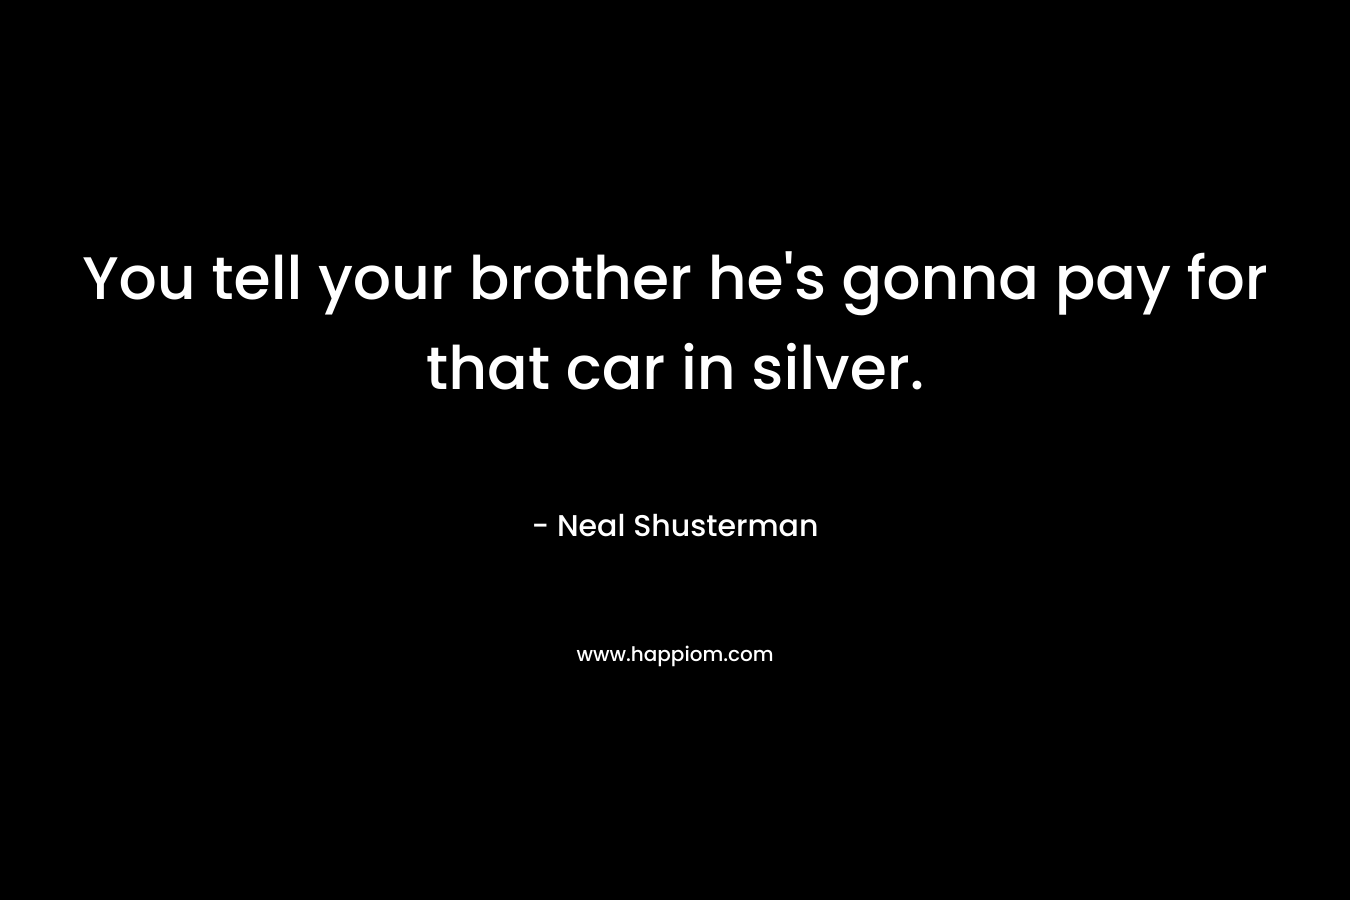 You tell your brother he's gonna pay for that car in silver.